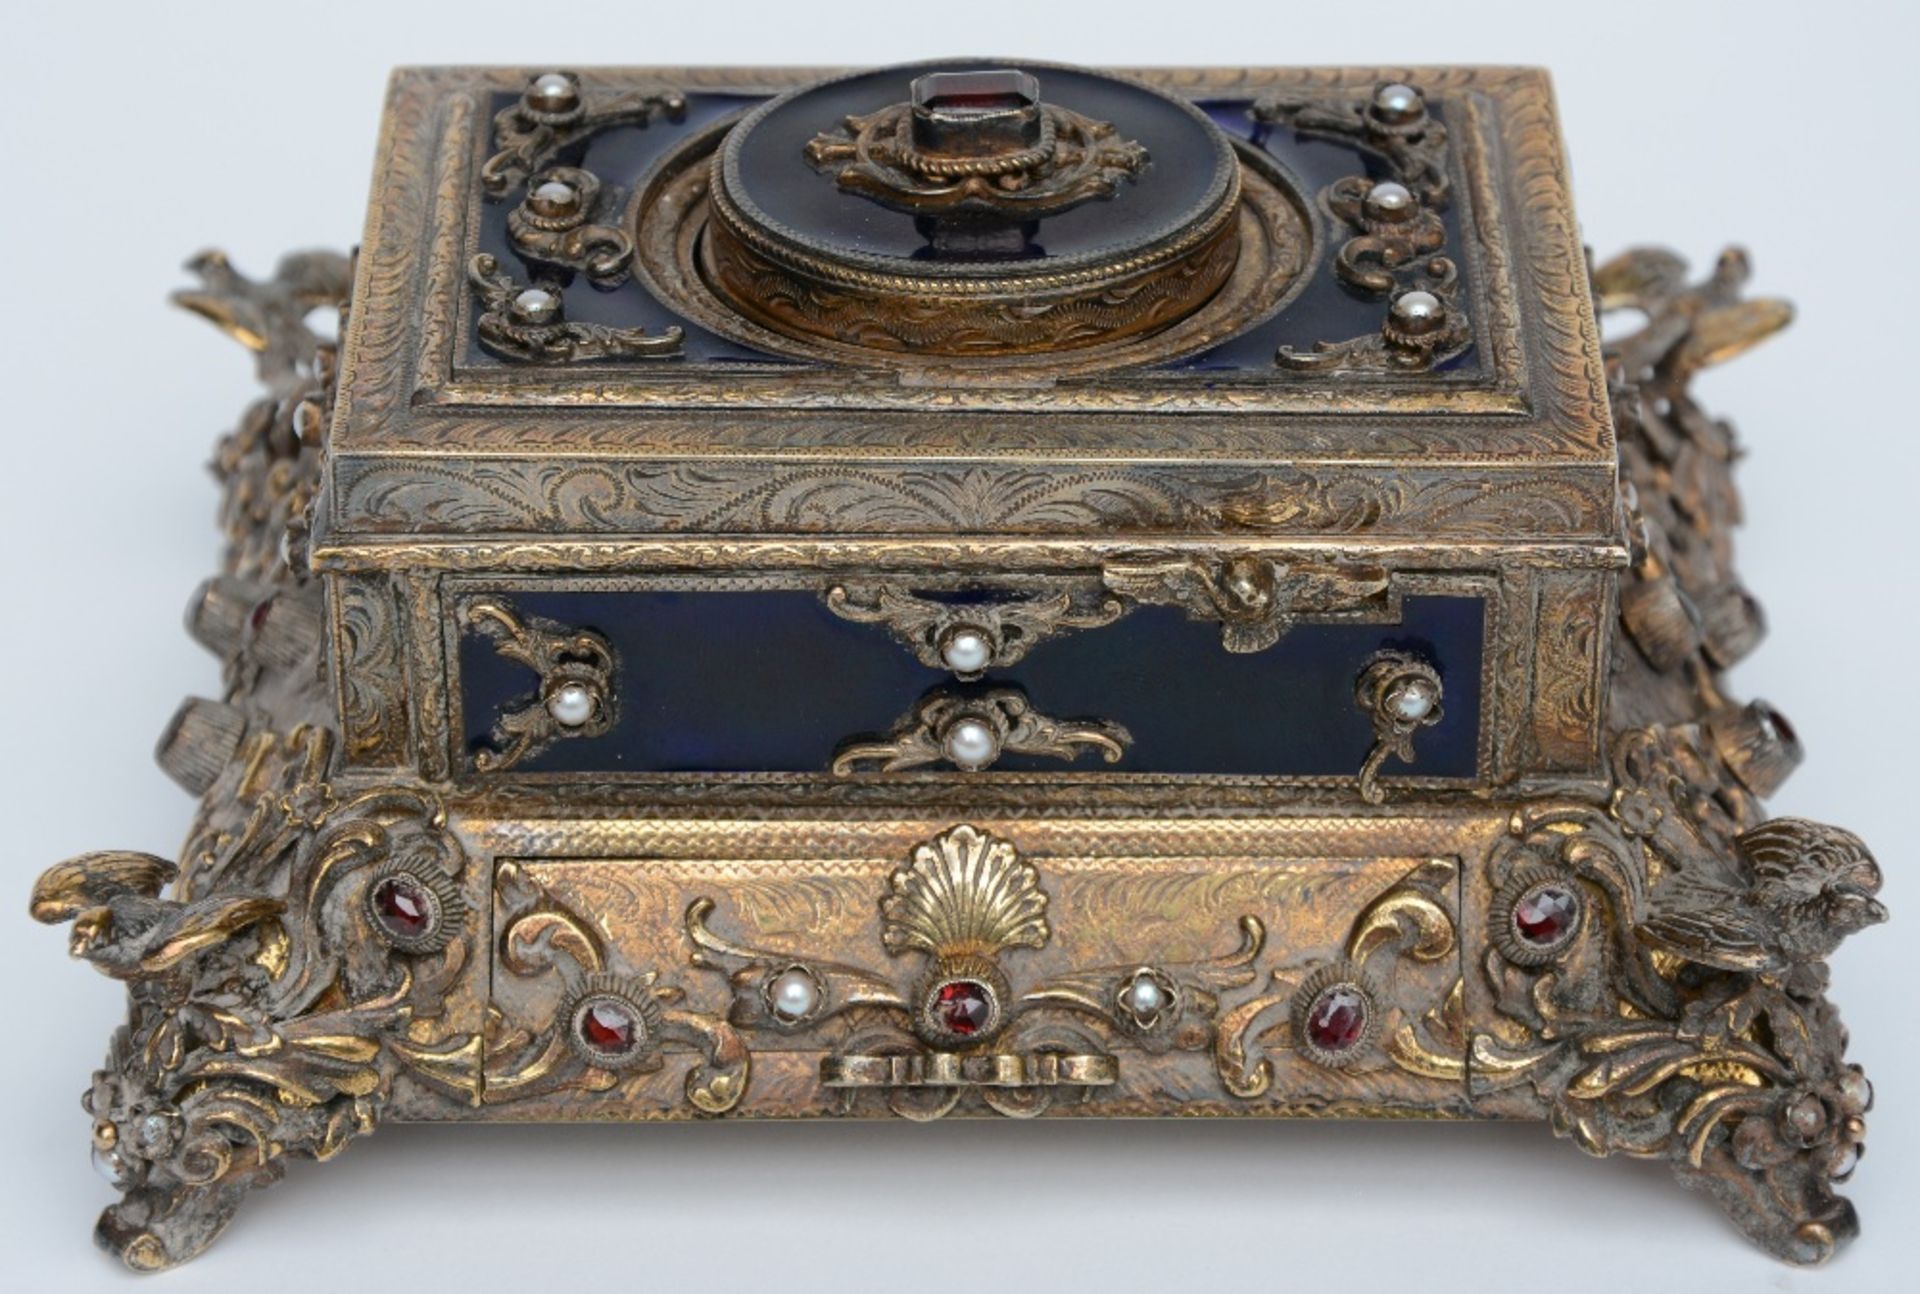 An exceptional gilt silver music box, partially cobalt blue enamelled, ruby set and inlaid with - Bild 2 aus 11